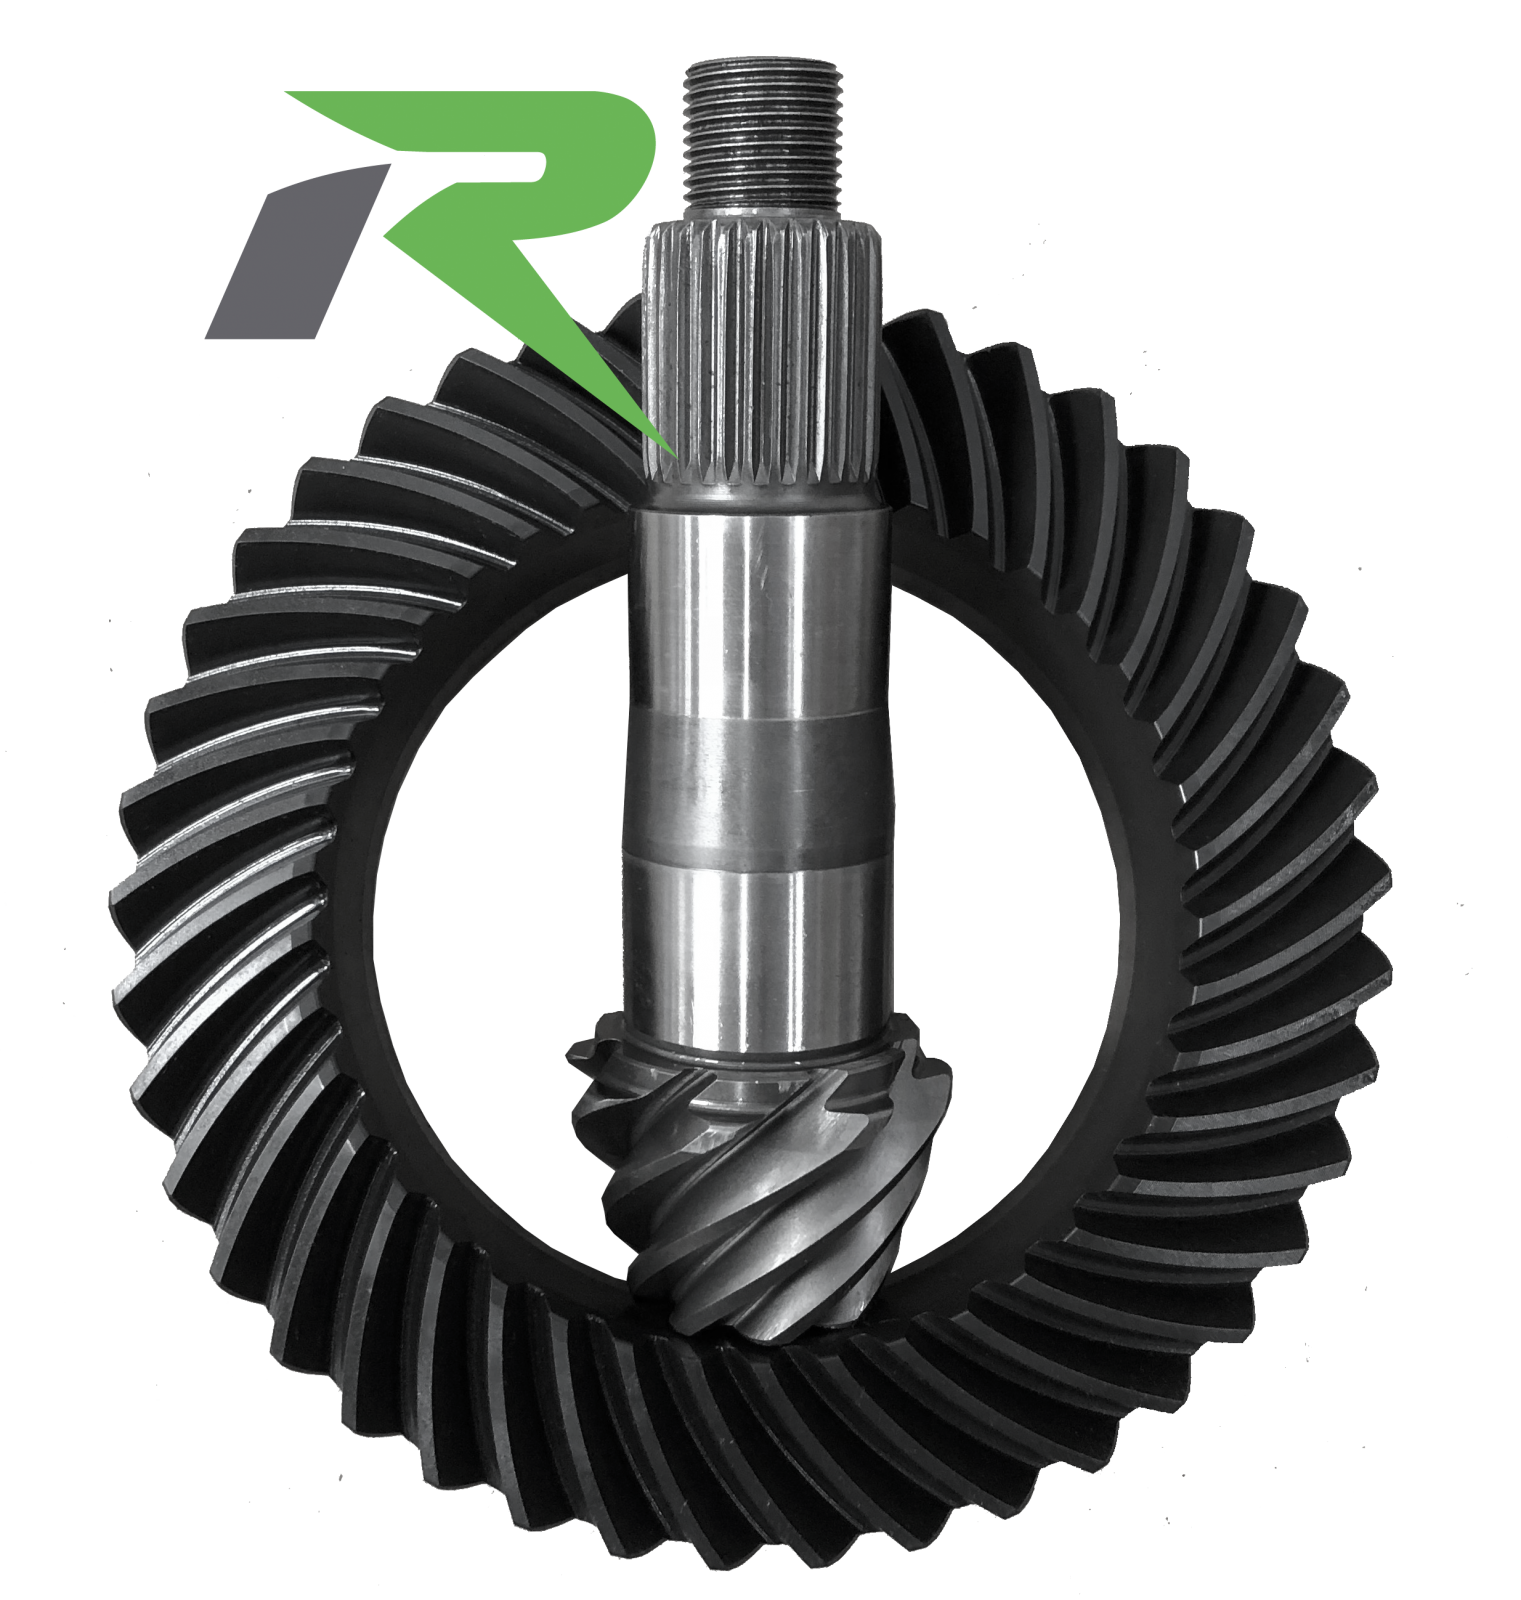 Revolution Gear & Axle Rear Ring And Pinion, Dana 44 220Mm Standard, 5.13 Ratio, 12 Bolt For